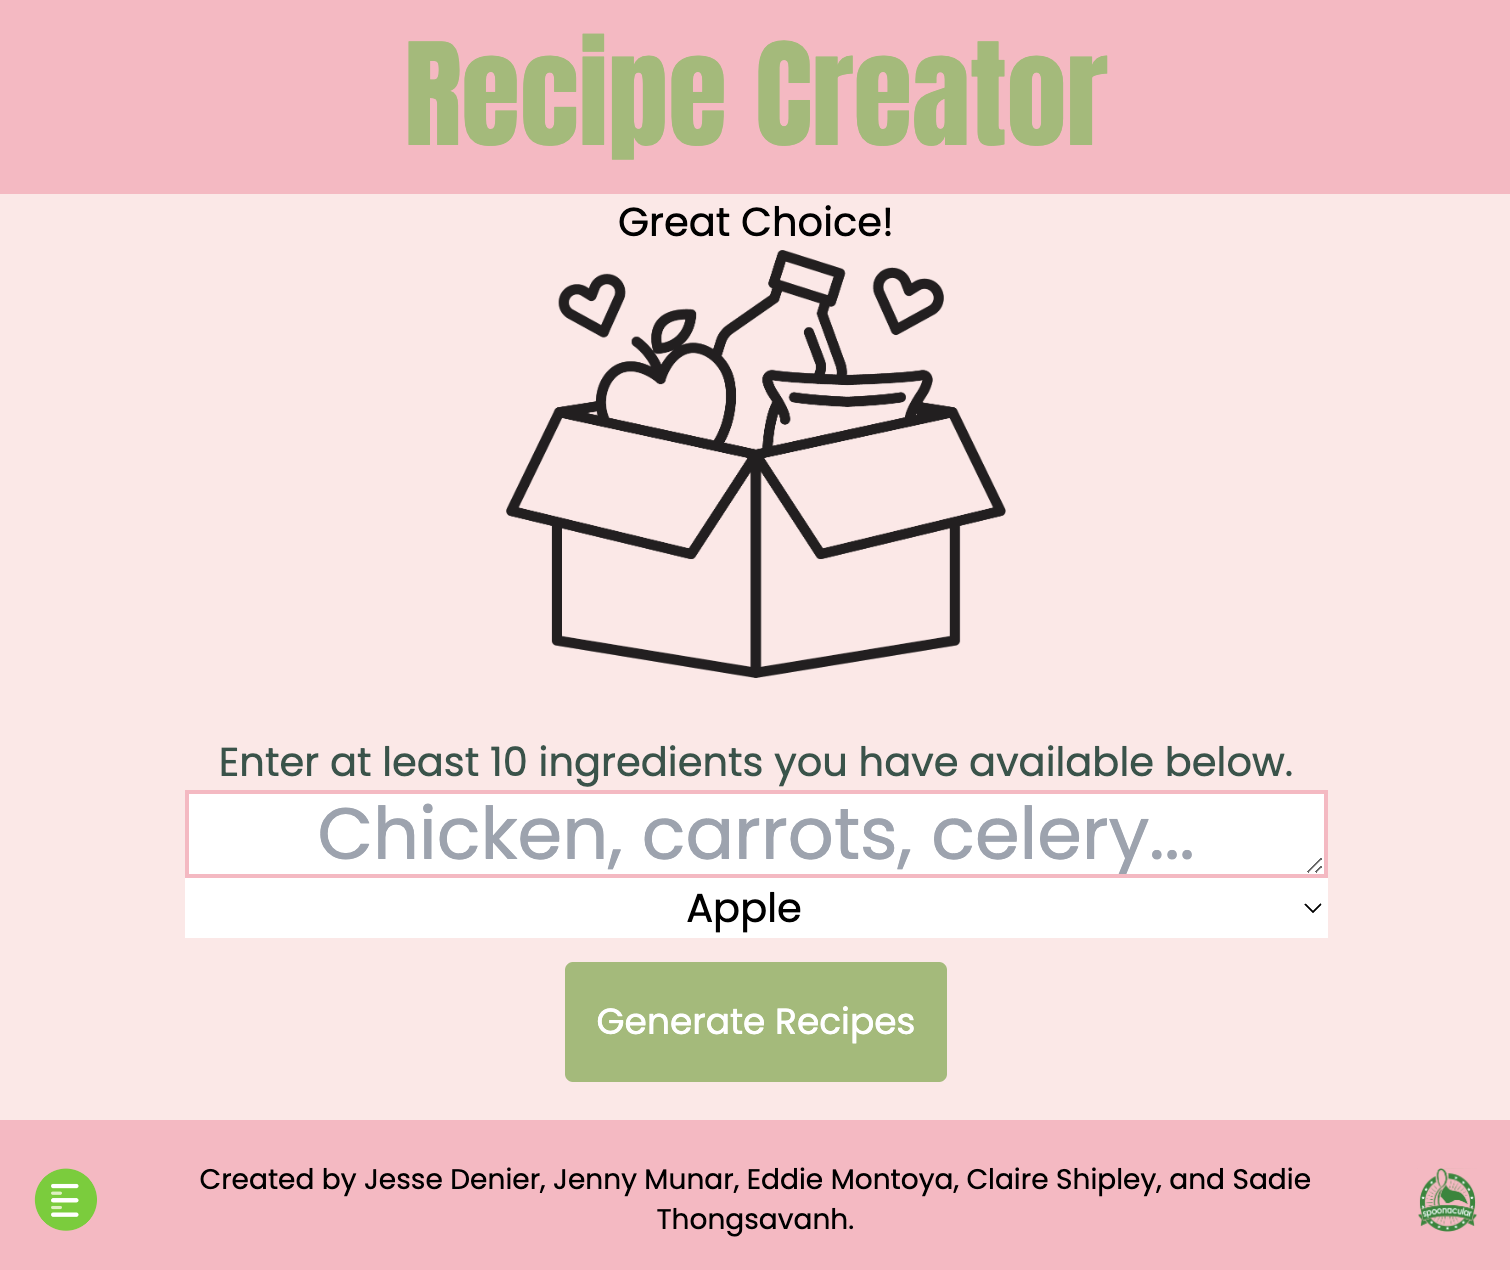 A single input form for entering ingredients